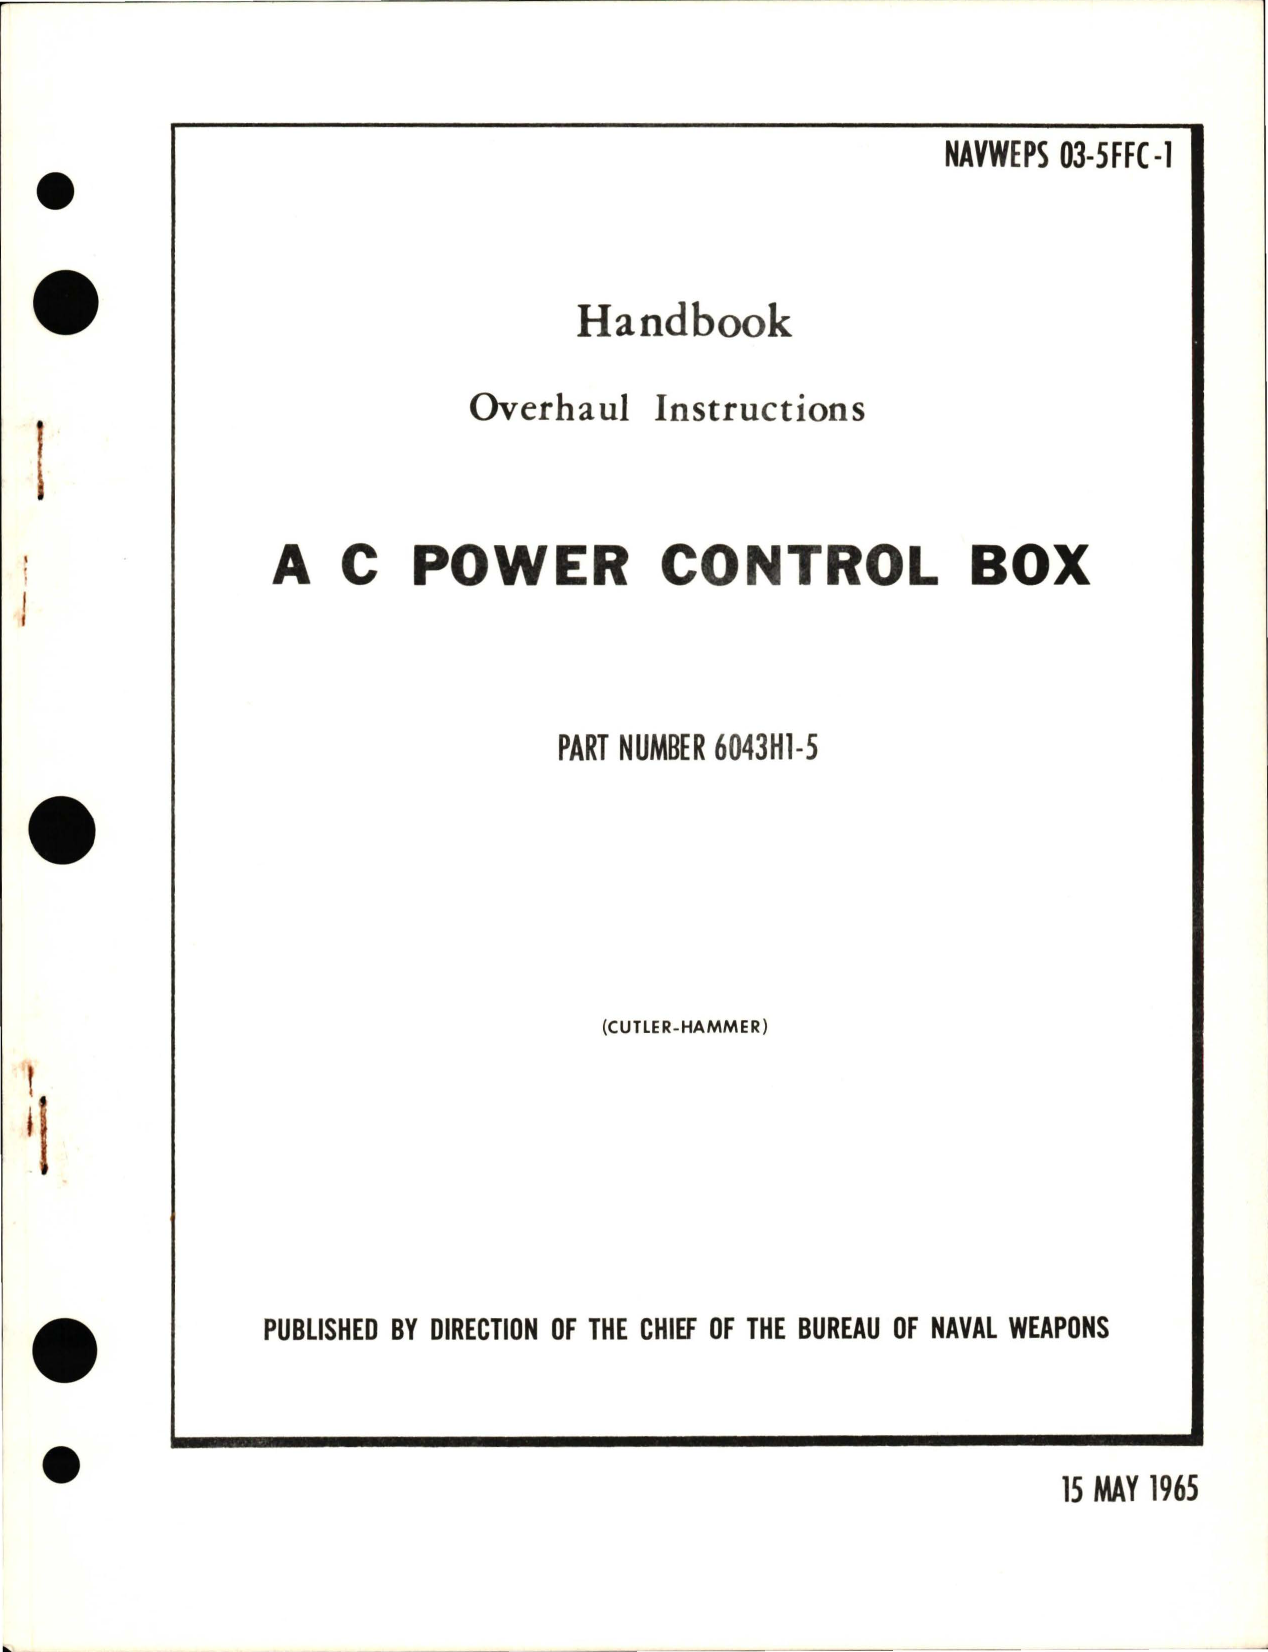 Sample page 1 from AirCorps Library document: Overhaul Instructions for AC Power Control Box - Part 6043H1-5 